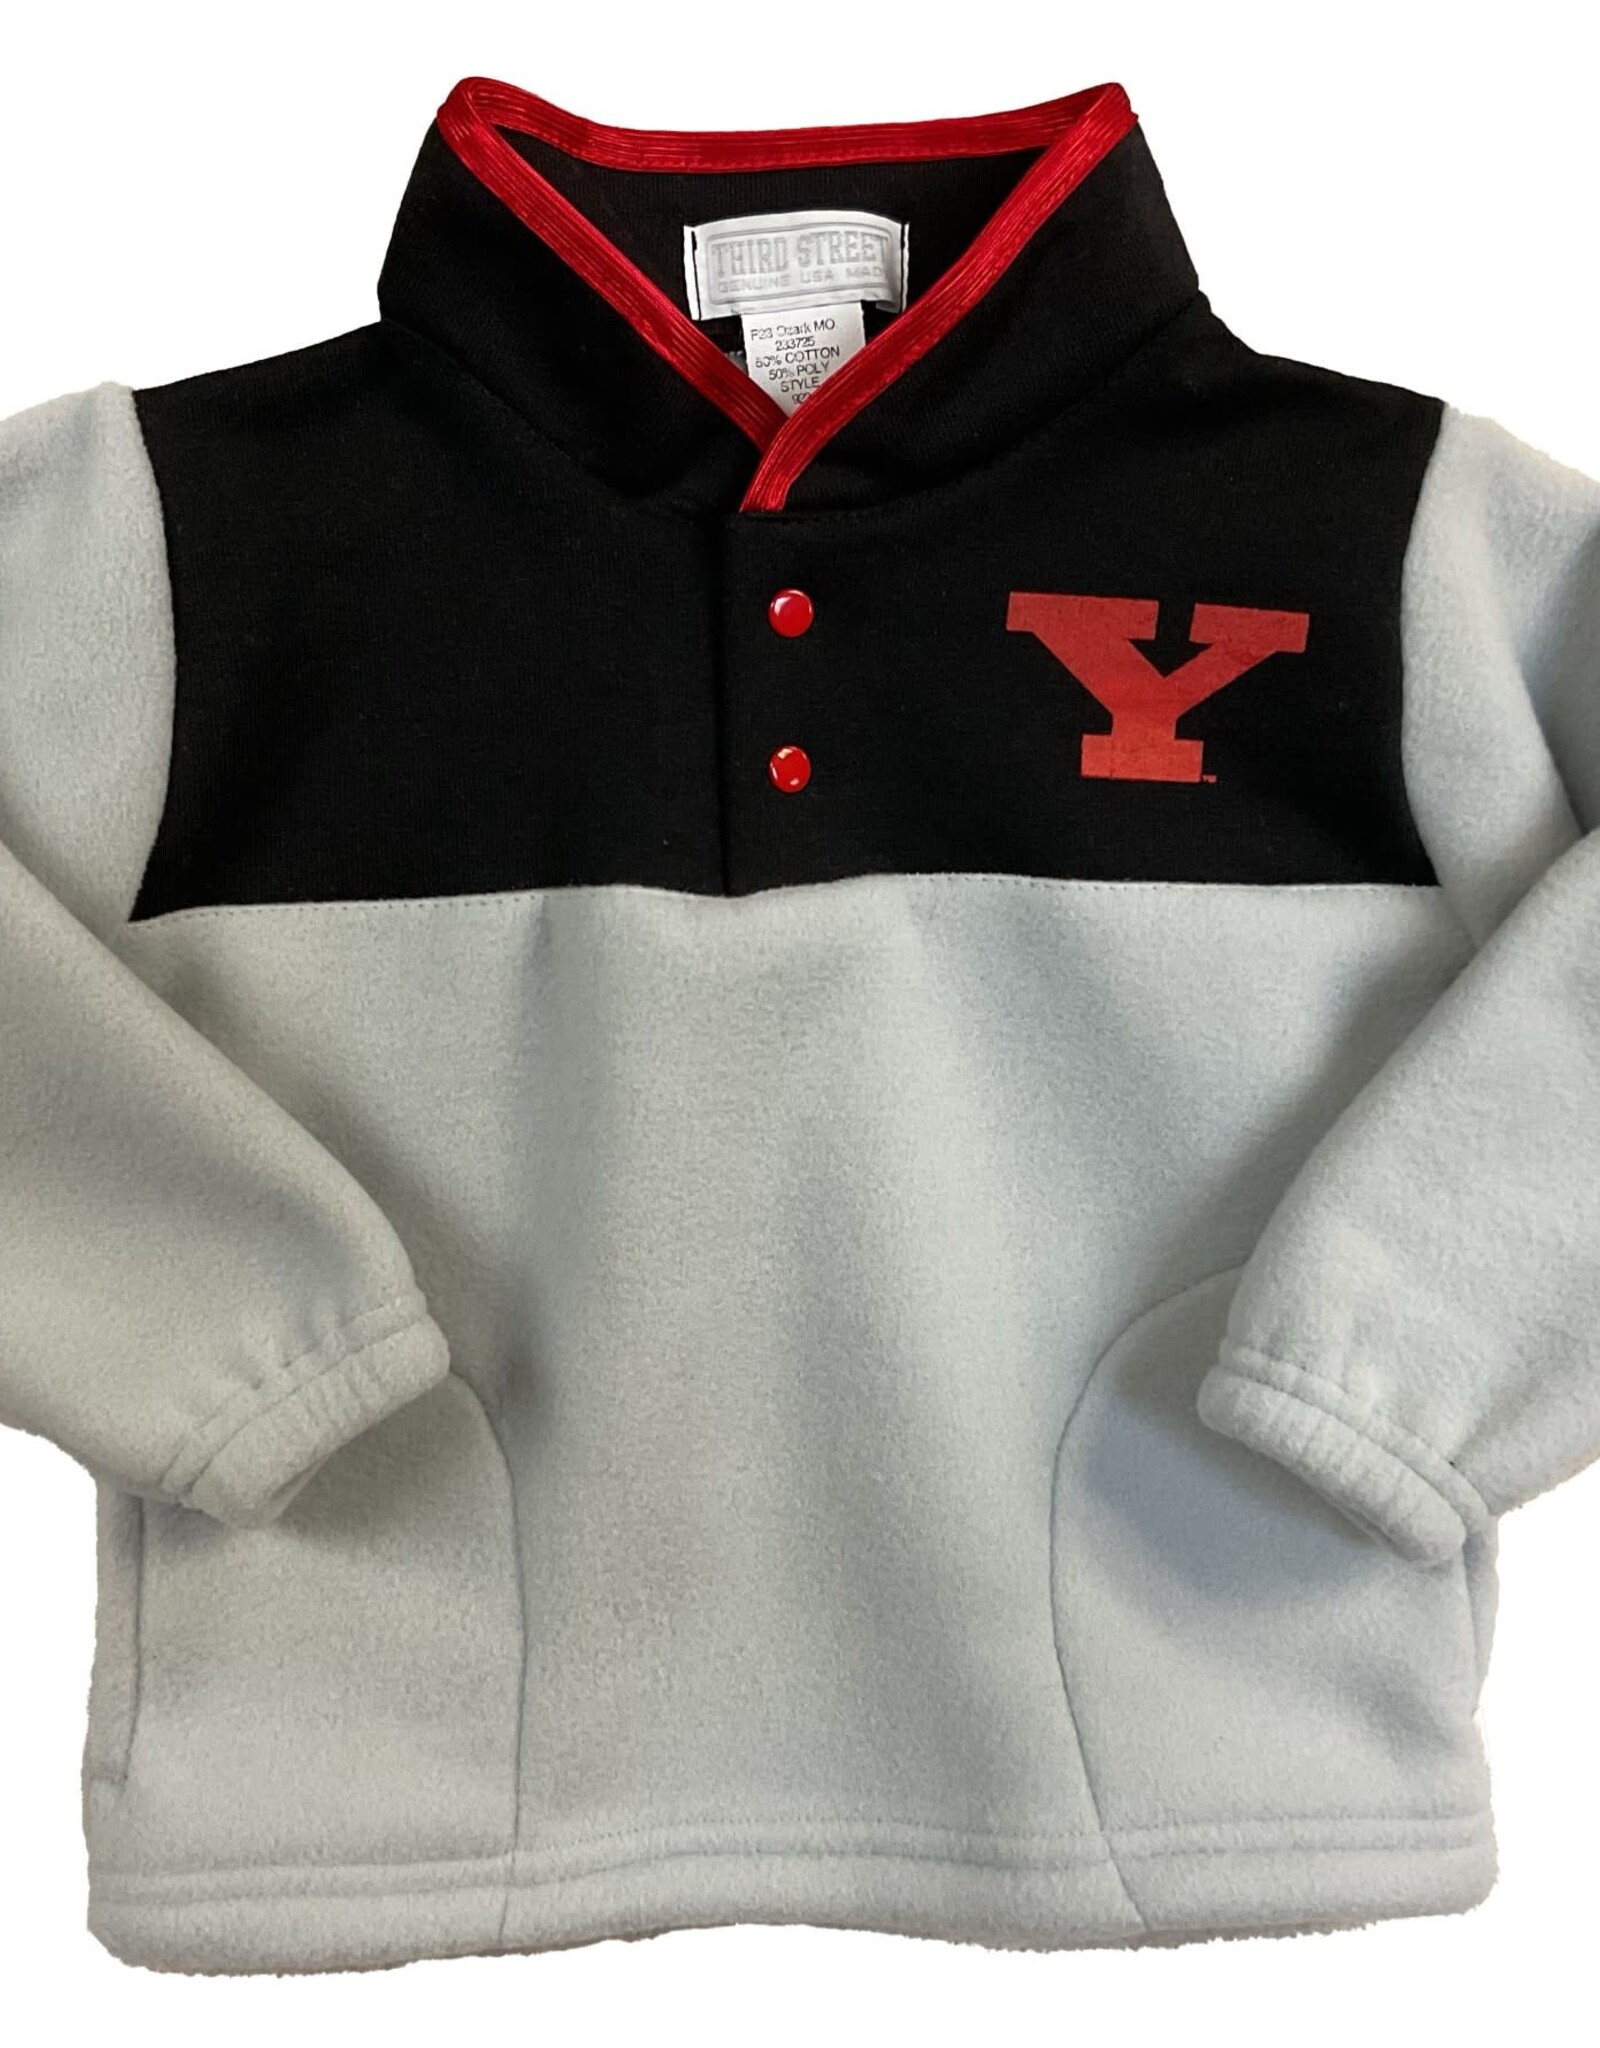 THIRD STREET SPORTSWEAR Youngstown State Penguins Youth Snap Polar Pullover